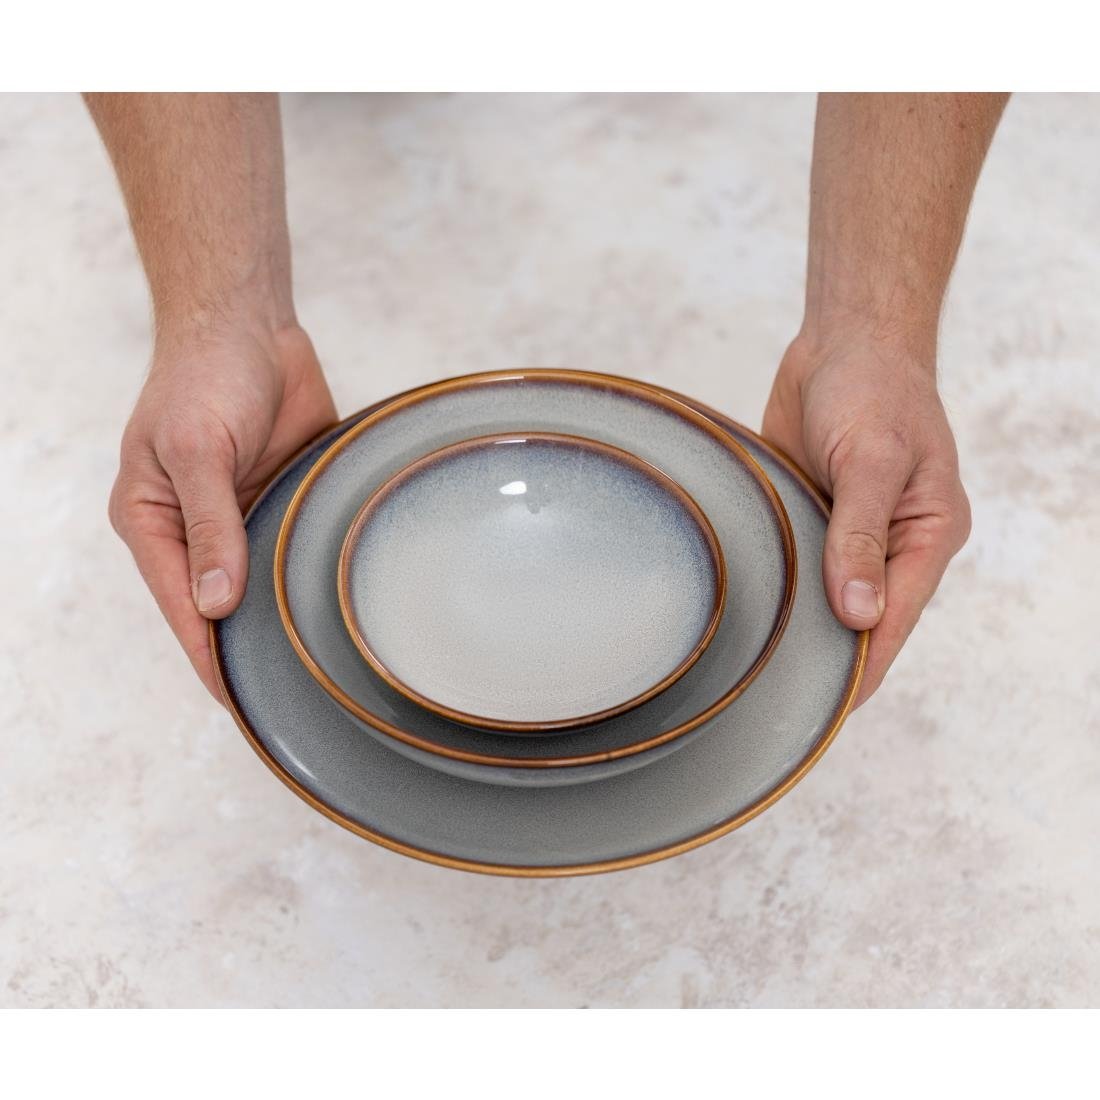 FU192 Olympia Drift Grey Plain Coupe Bowls 155mm (Pack of 6)